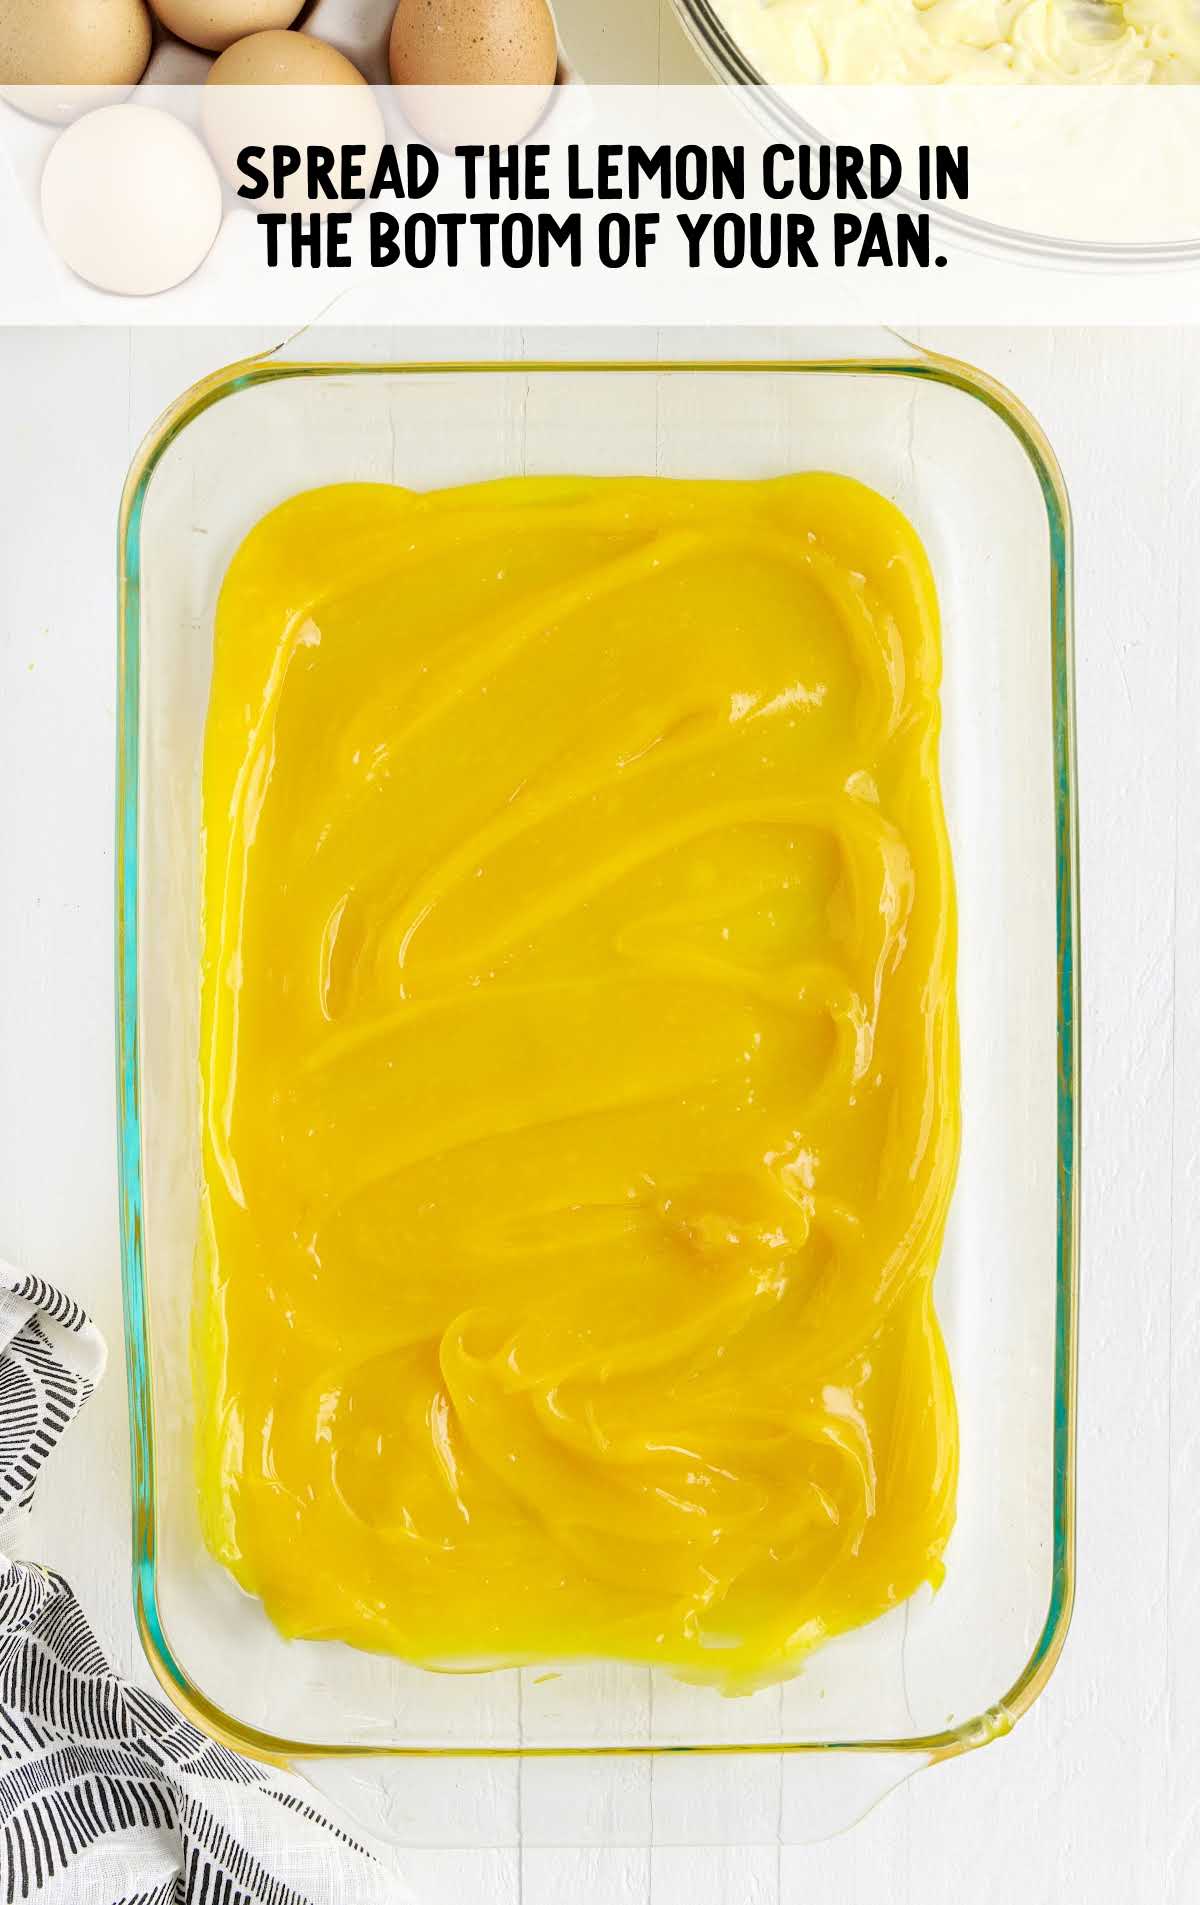 lemon curd spread at the bottom of the pan